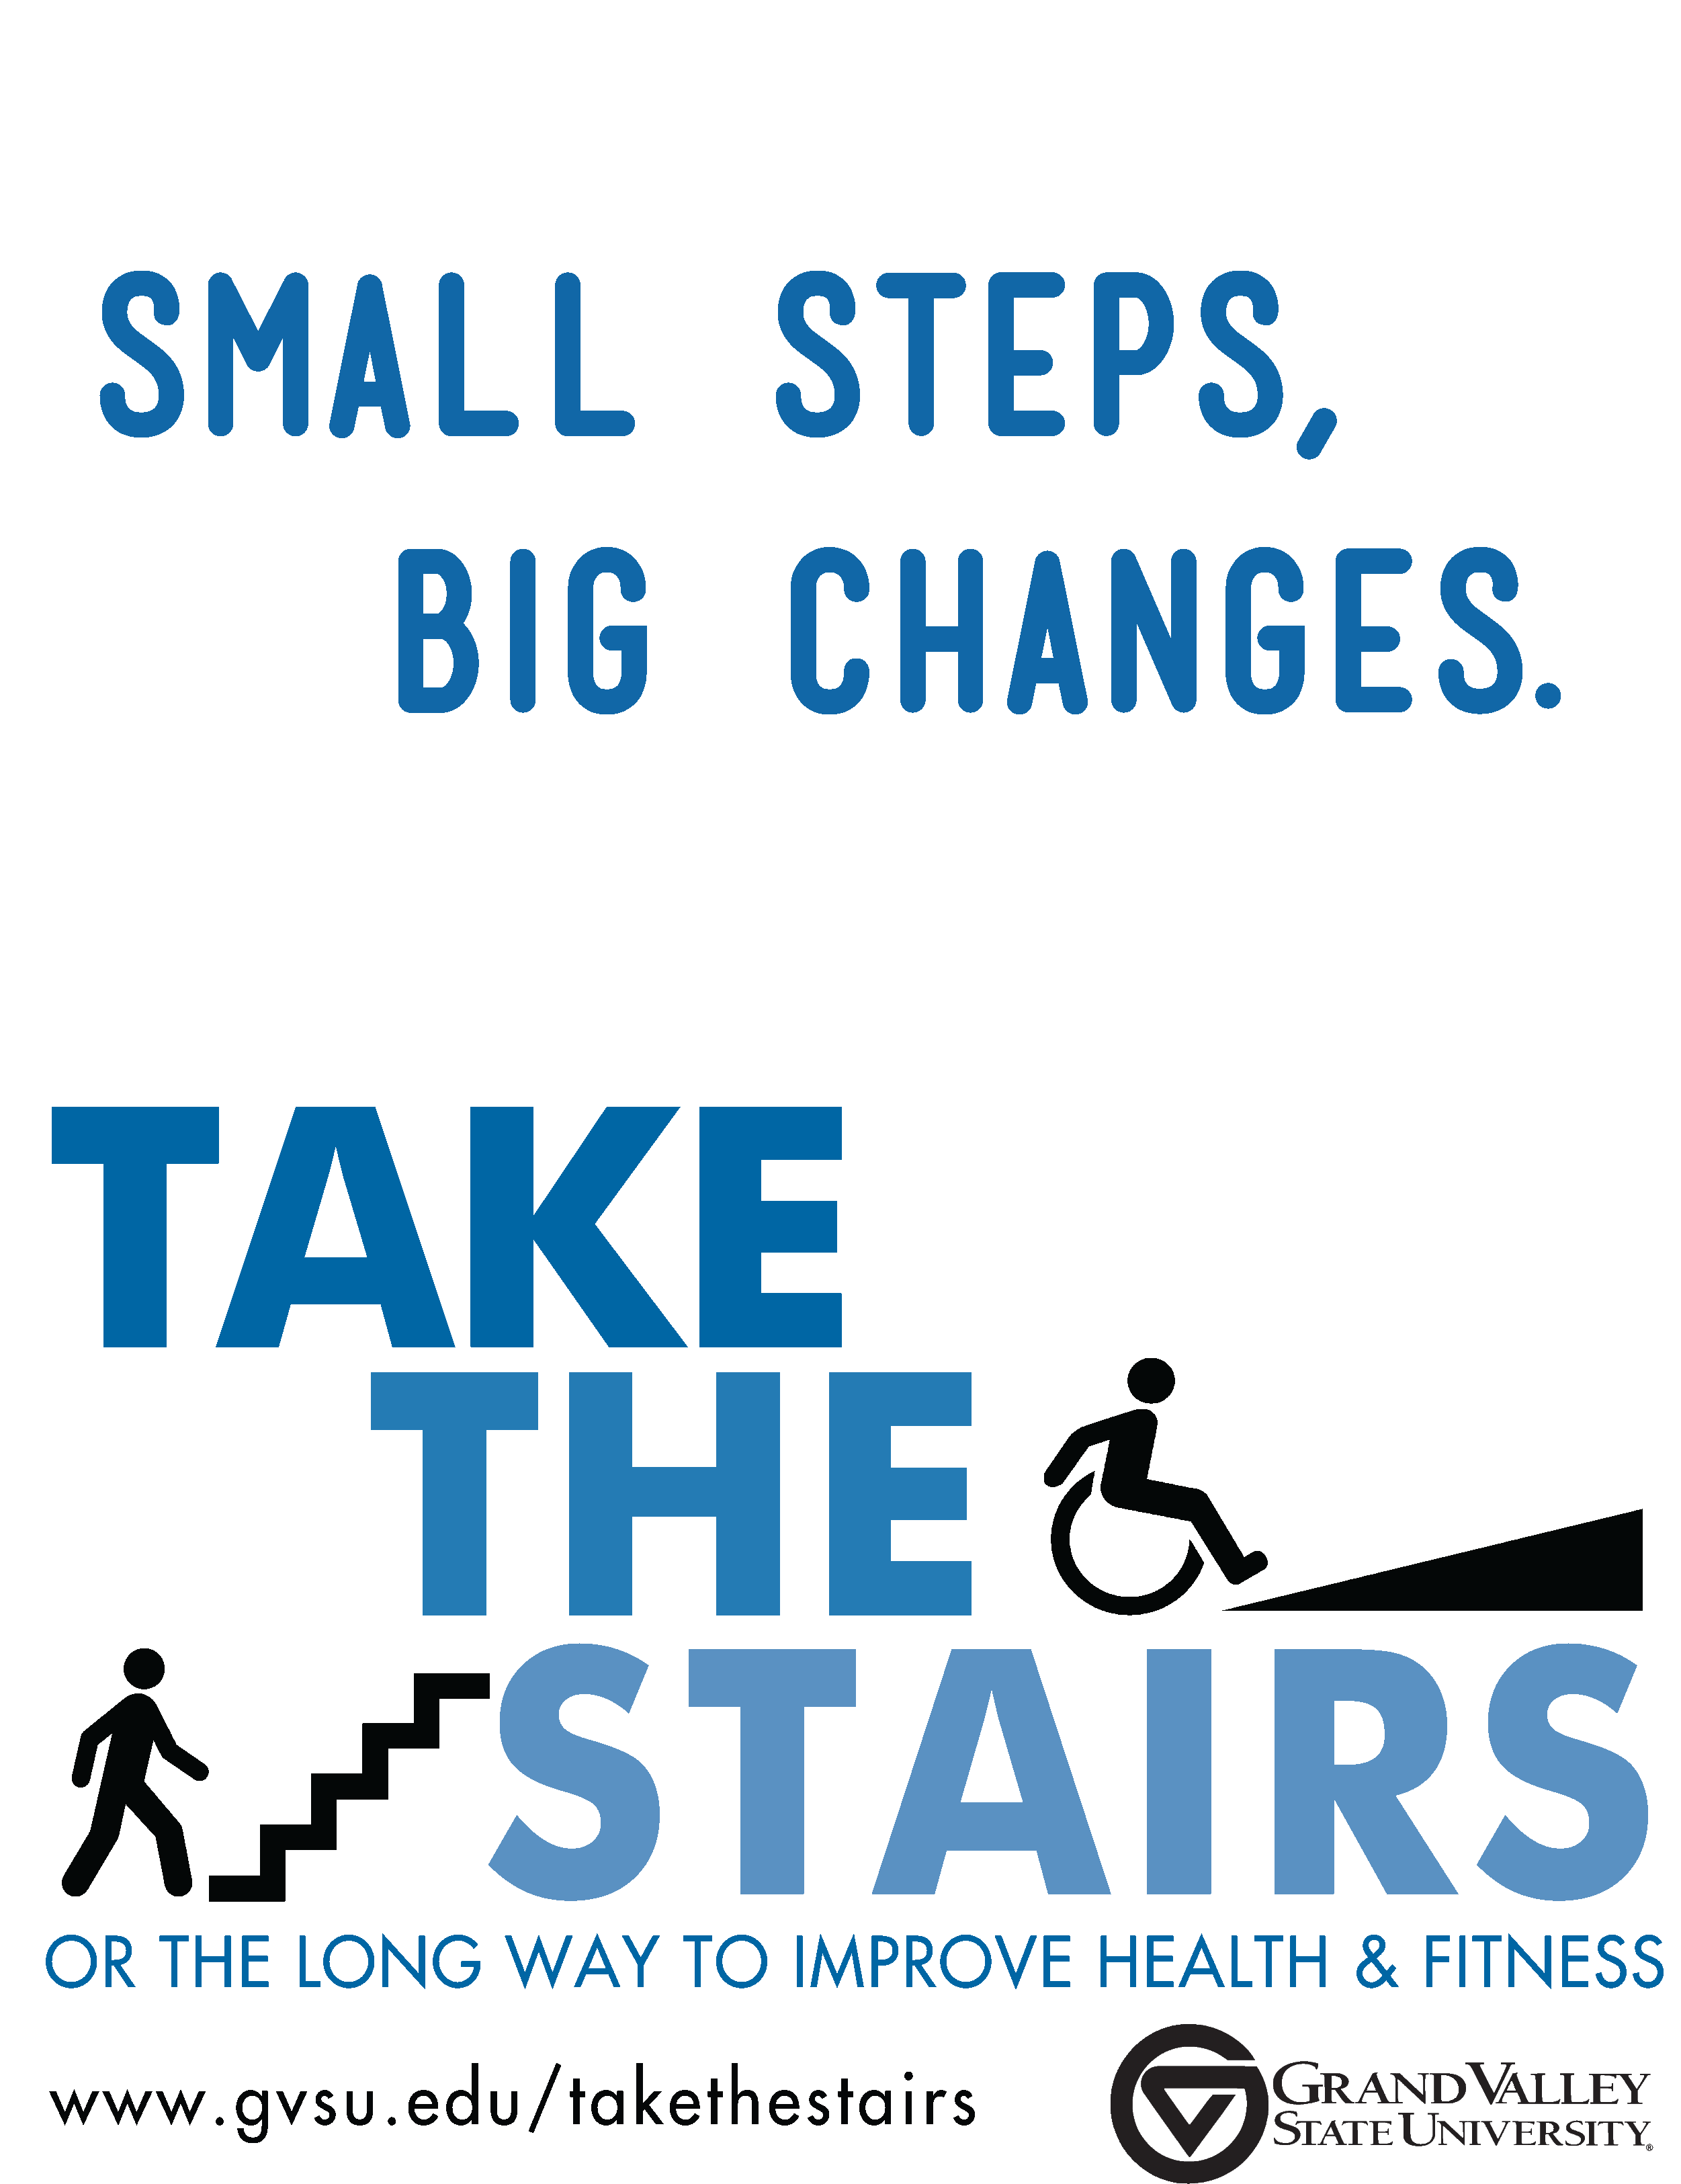 Small Steps, Big Changes: Take The Stairs